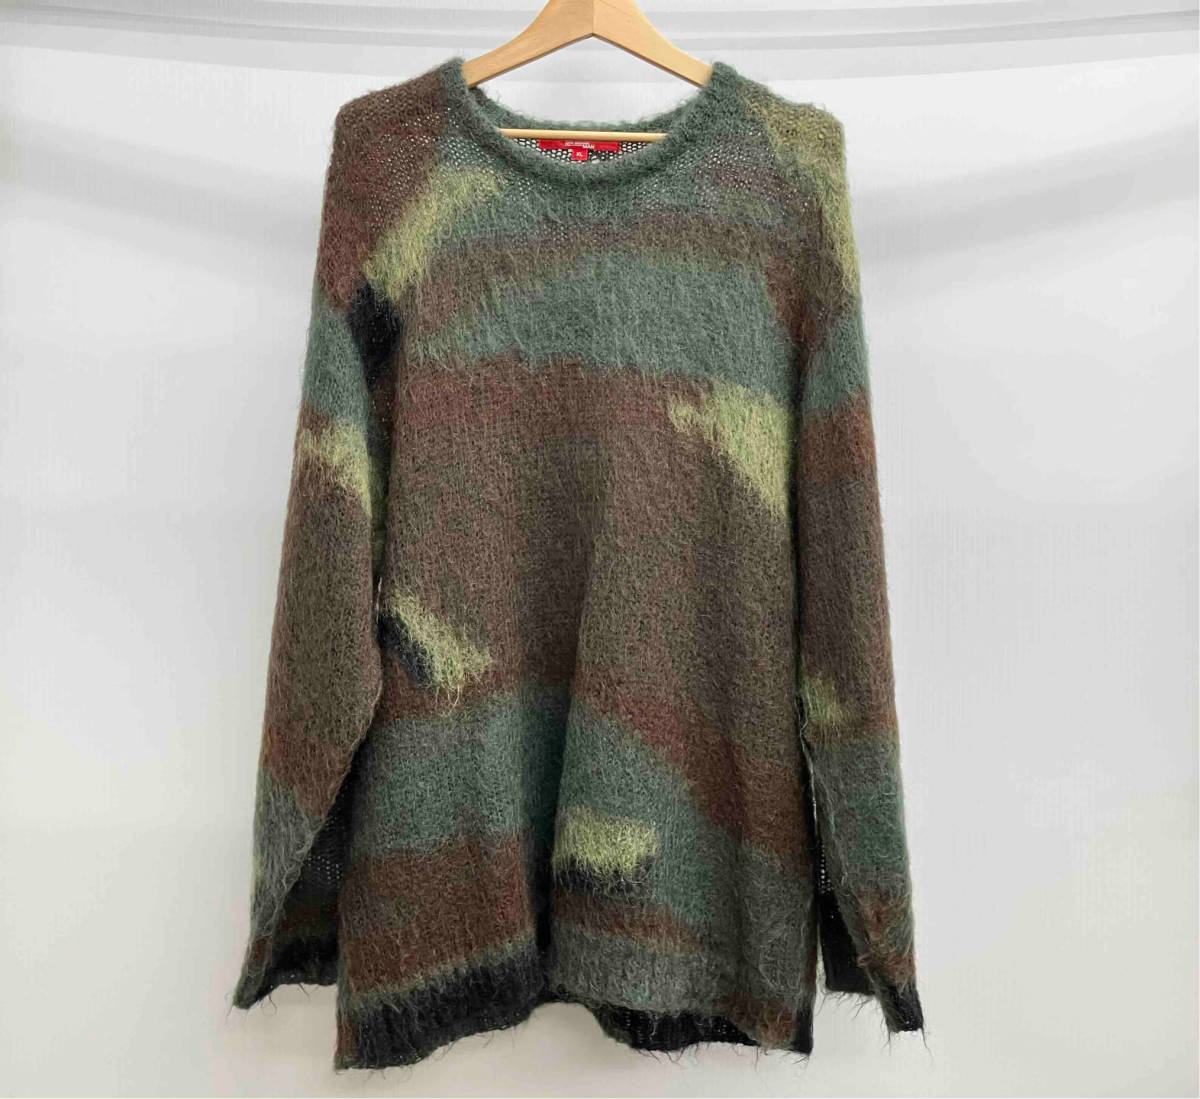 Supreme COMME des GARCONS Brushed Camo Sweater Olive カモフラ柄 XL 21AW ニット